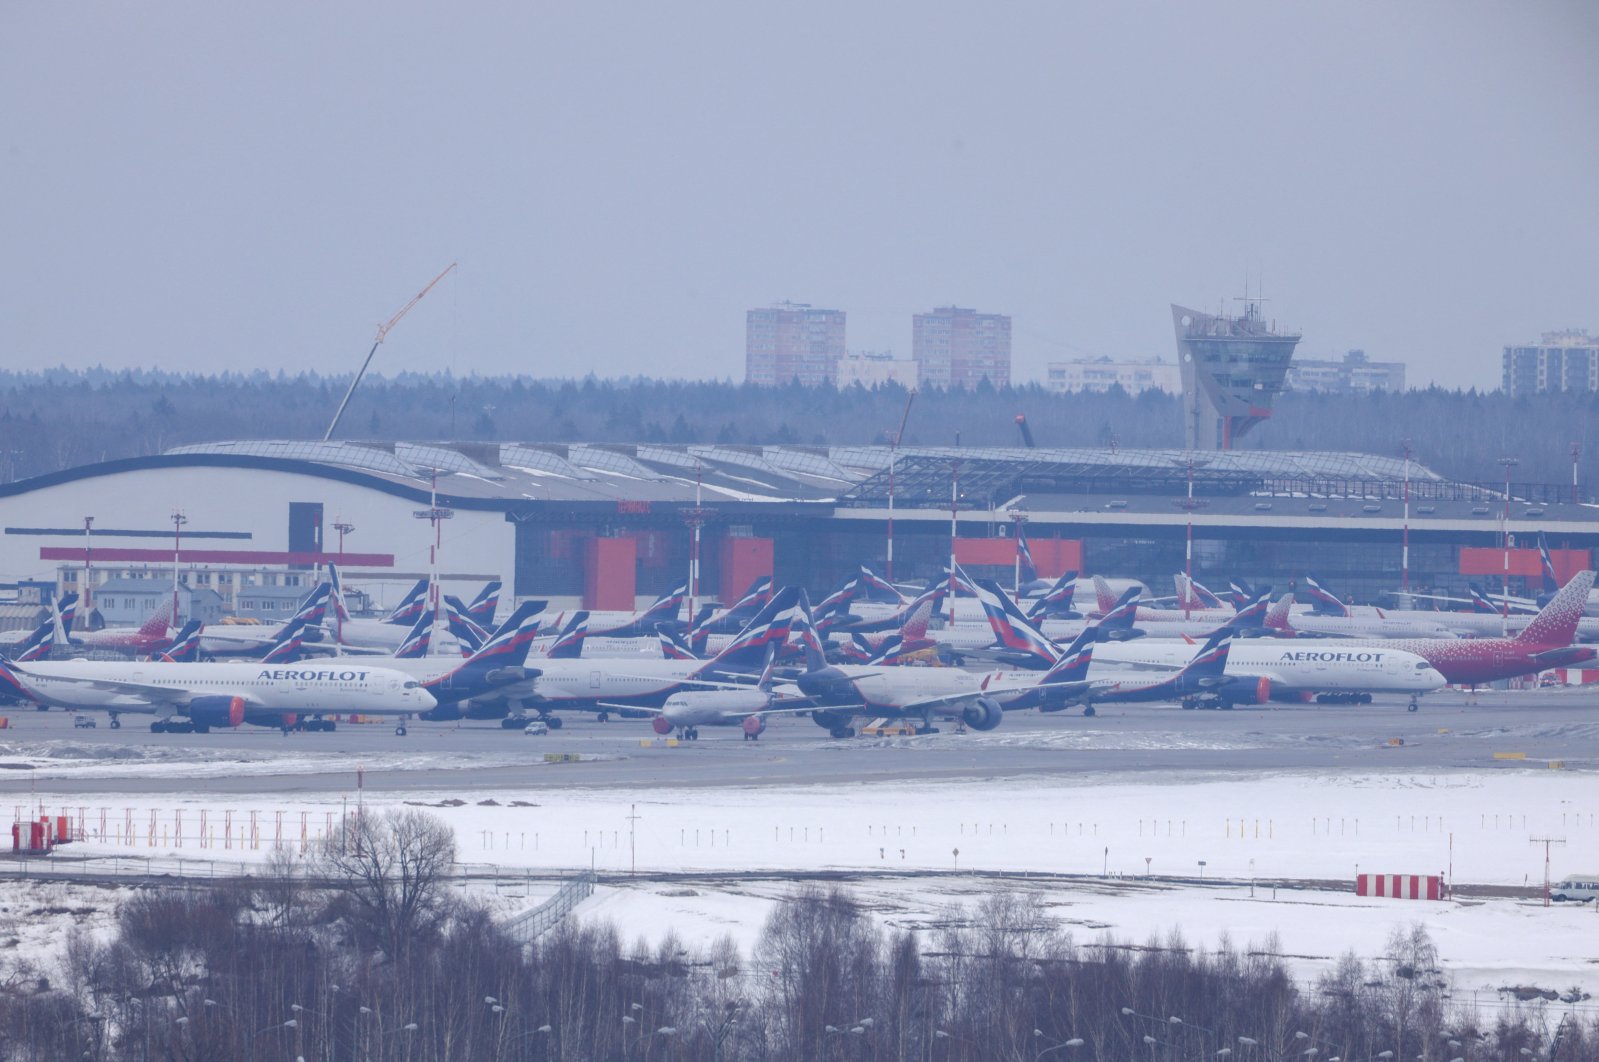 Passenger planes owned by Russia&#039;s airlines, including Aeroflot and Rossiya, are parked at Sheremetyevo International Airport in Moscow, Russia, March 12, 2022. (Reuters Photo)